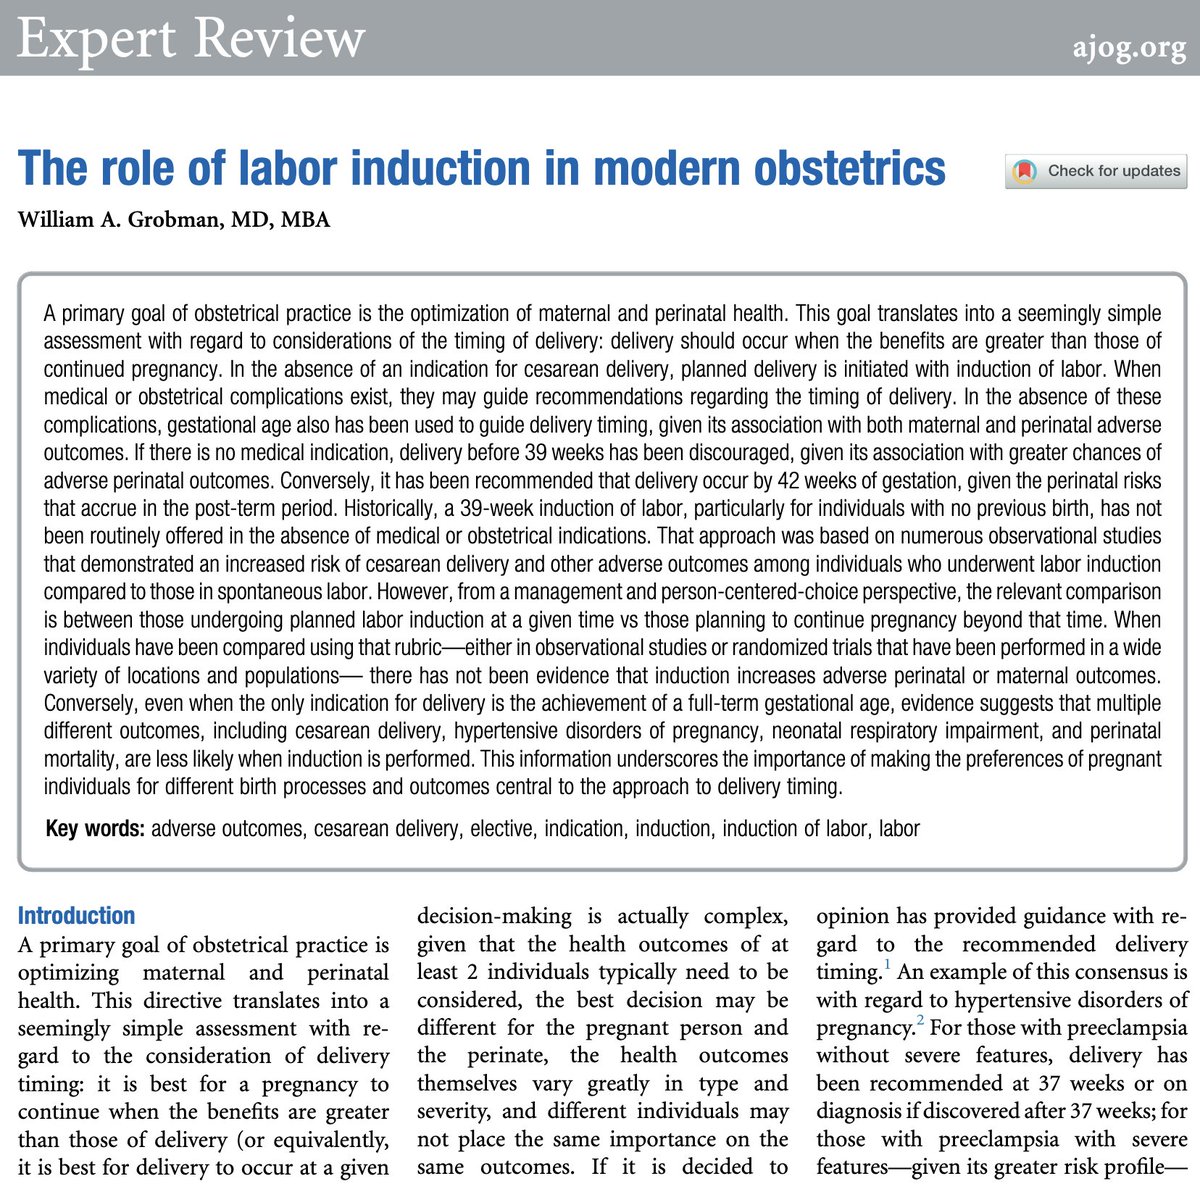 AJOG Expert Review: The role of labor induction in modern obstetrics ow.ly/R5kE50QWoCs